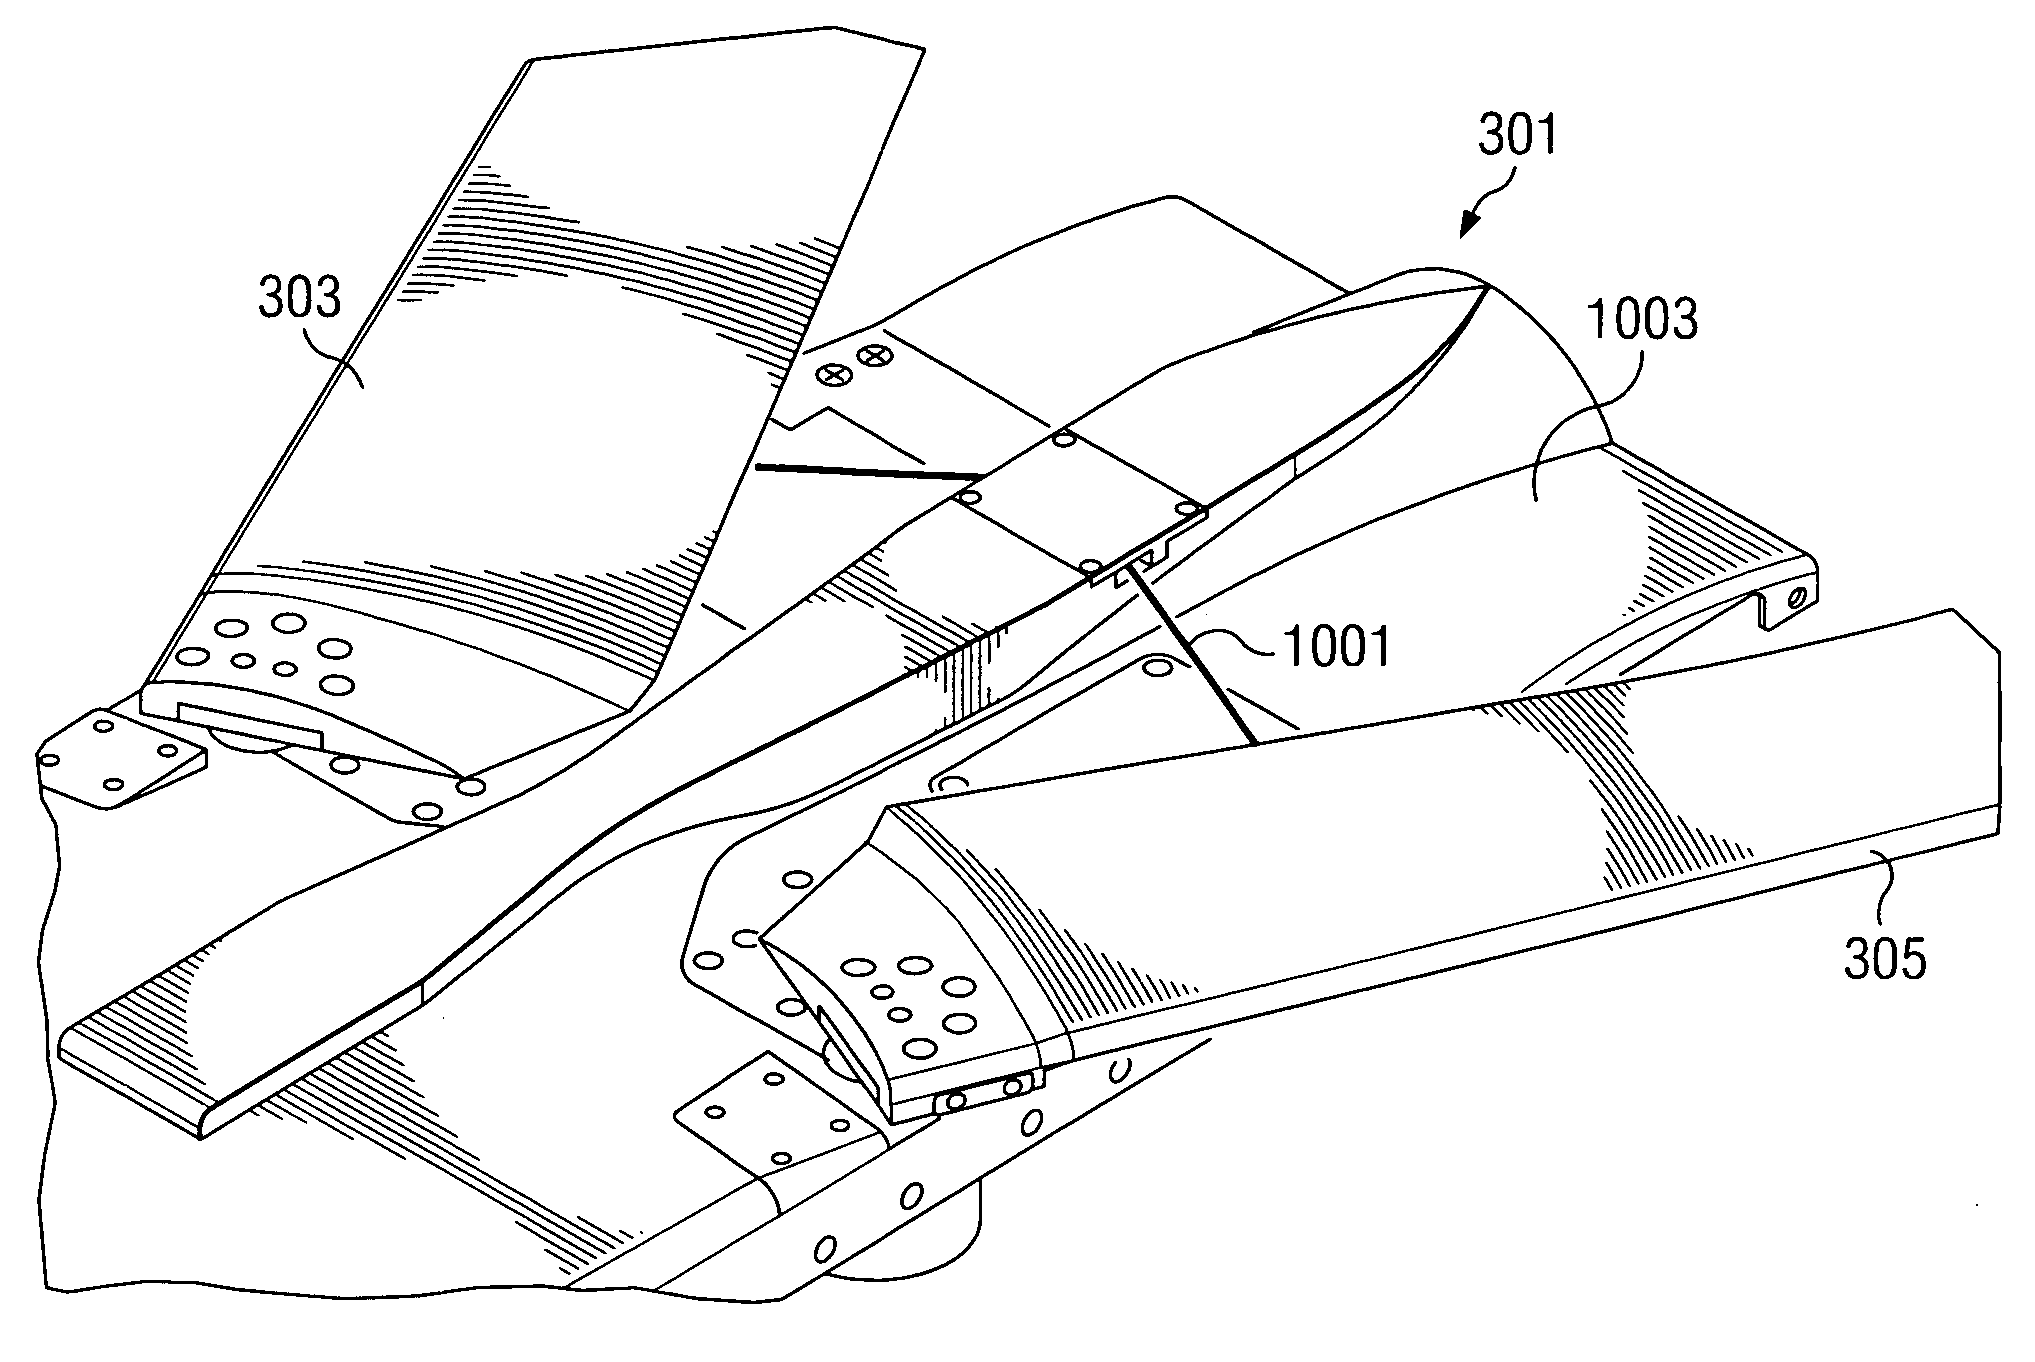 Apparatus and method for restraining and deploying an airfoil